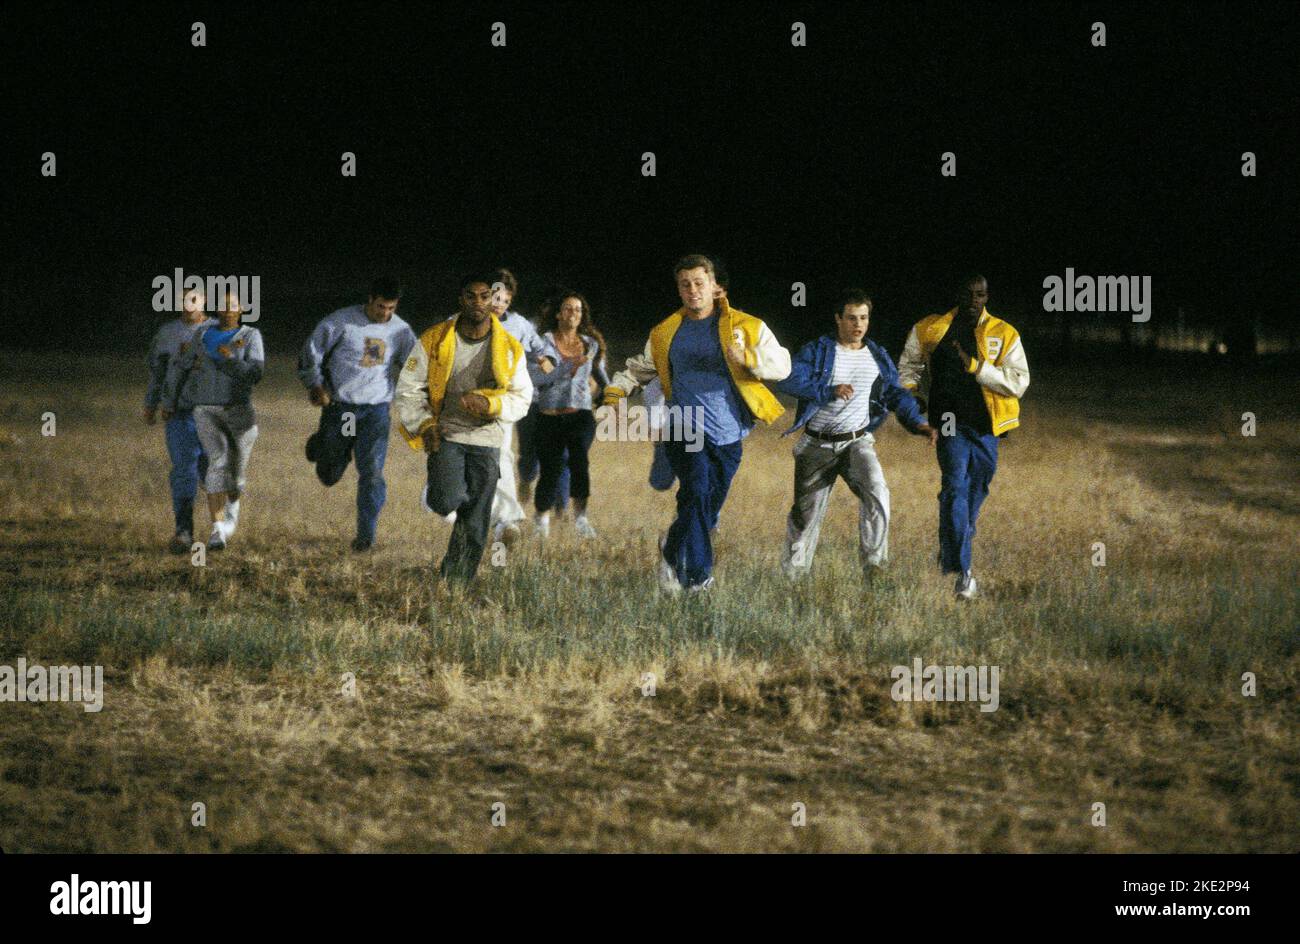 JEEPERS CREEPERS II, STUDENTS RUN THROUGH FIELD, 2003 Stock Photo